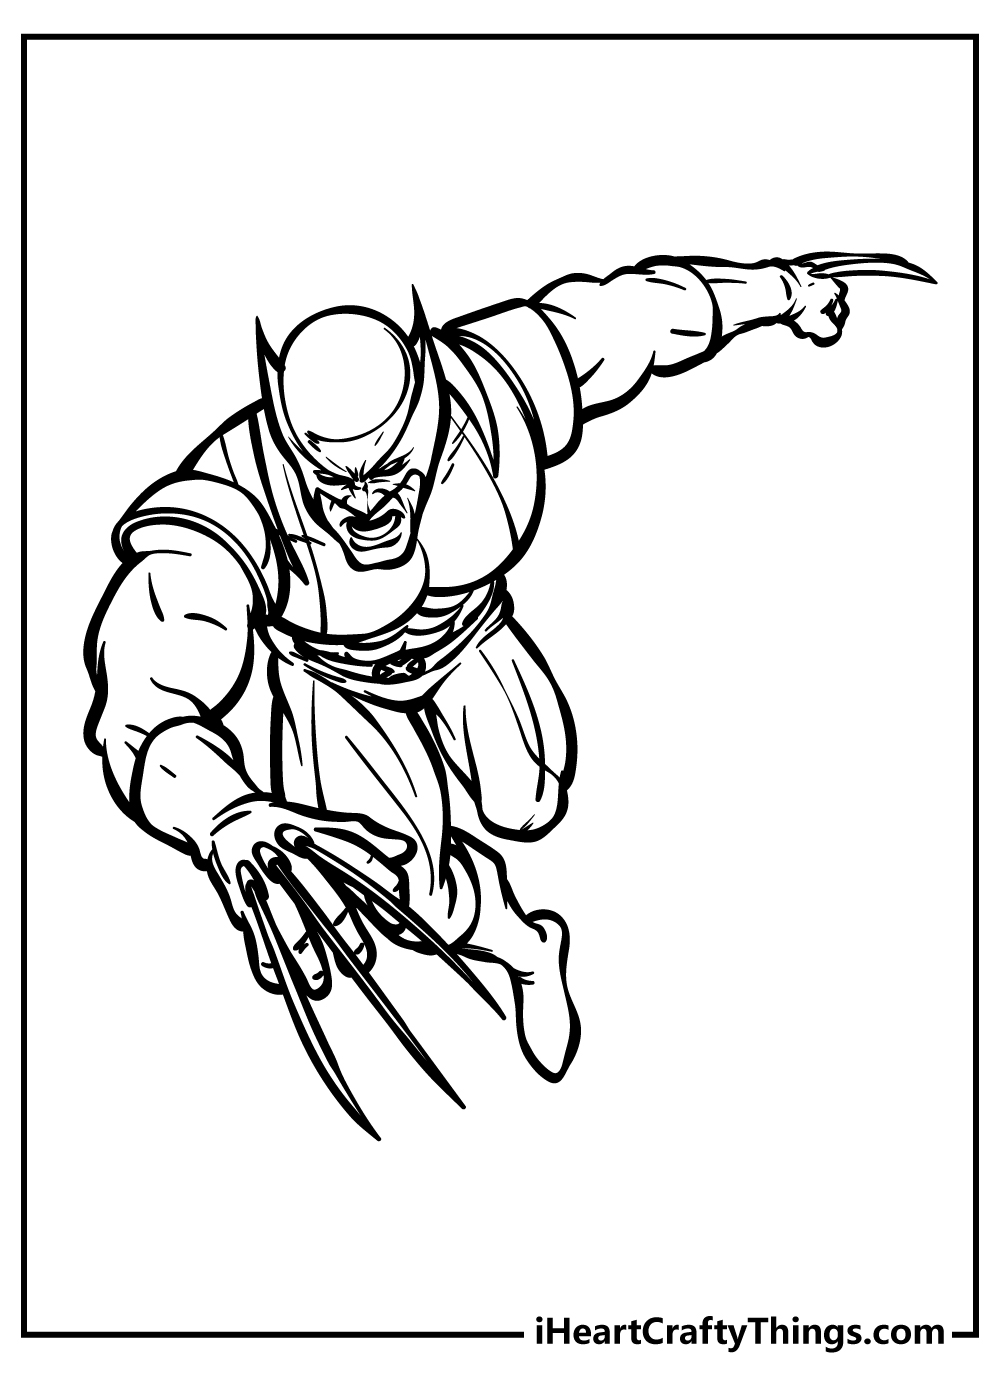 Superhero Coloring Pages Updated 21